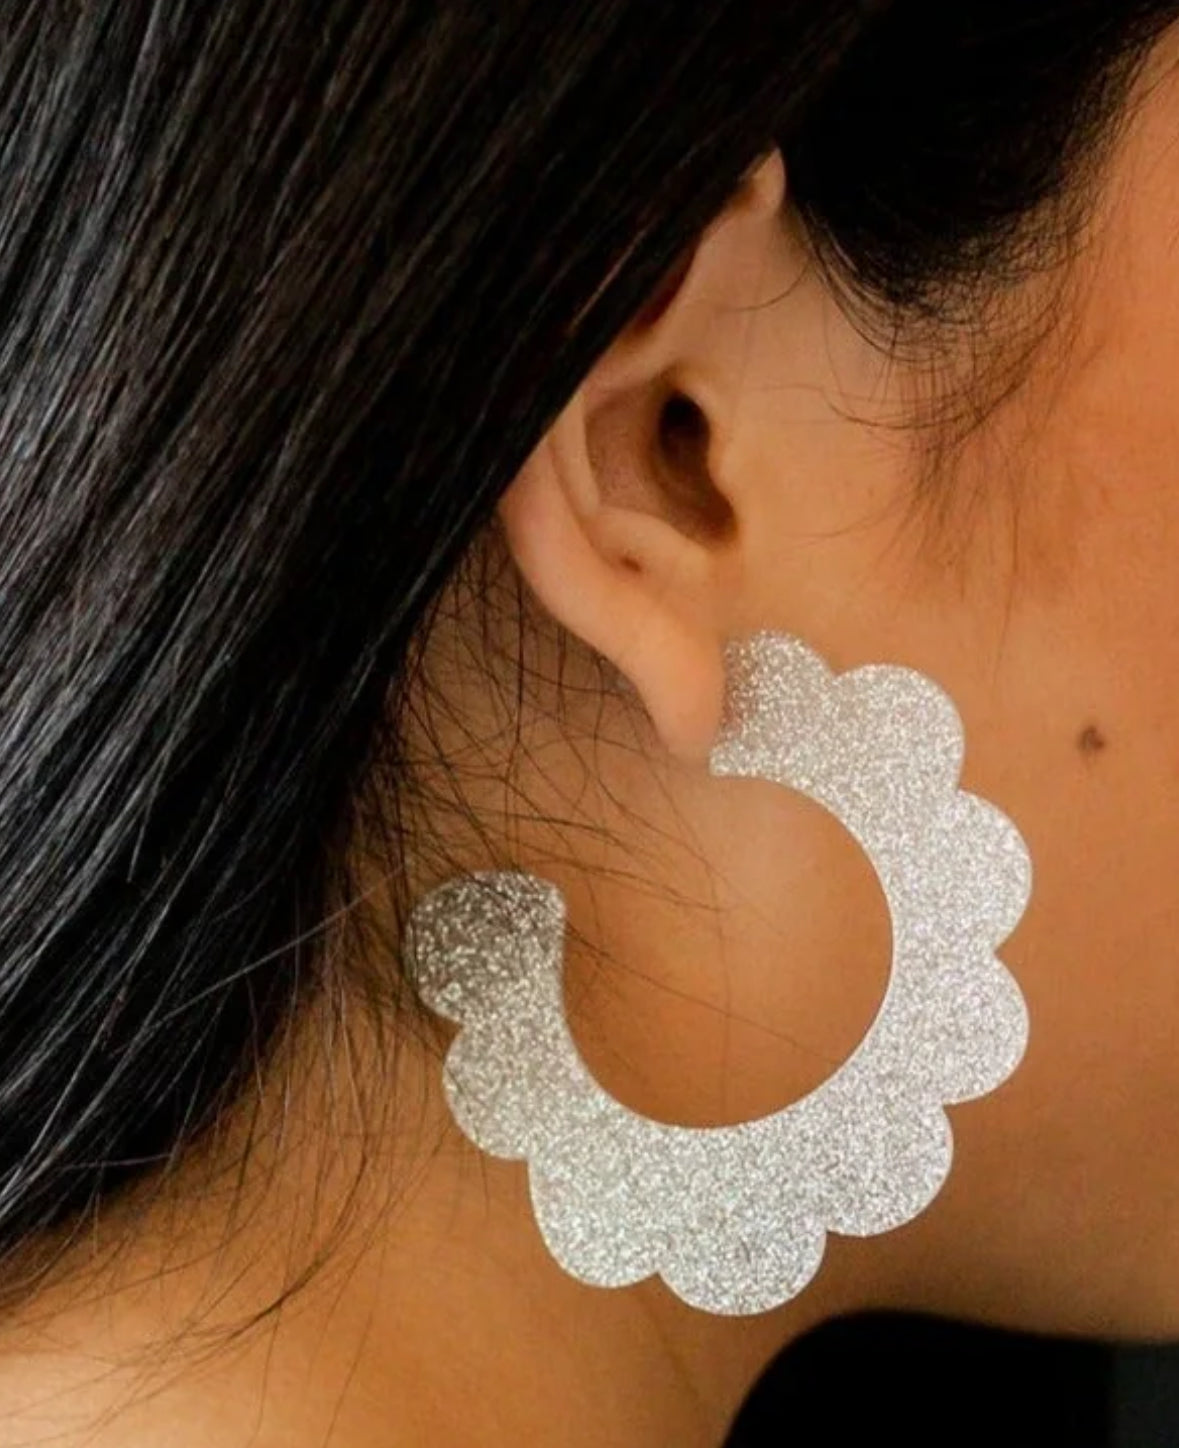 Scalloped Hoops